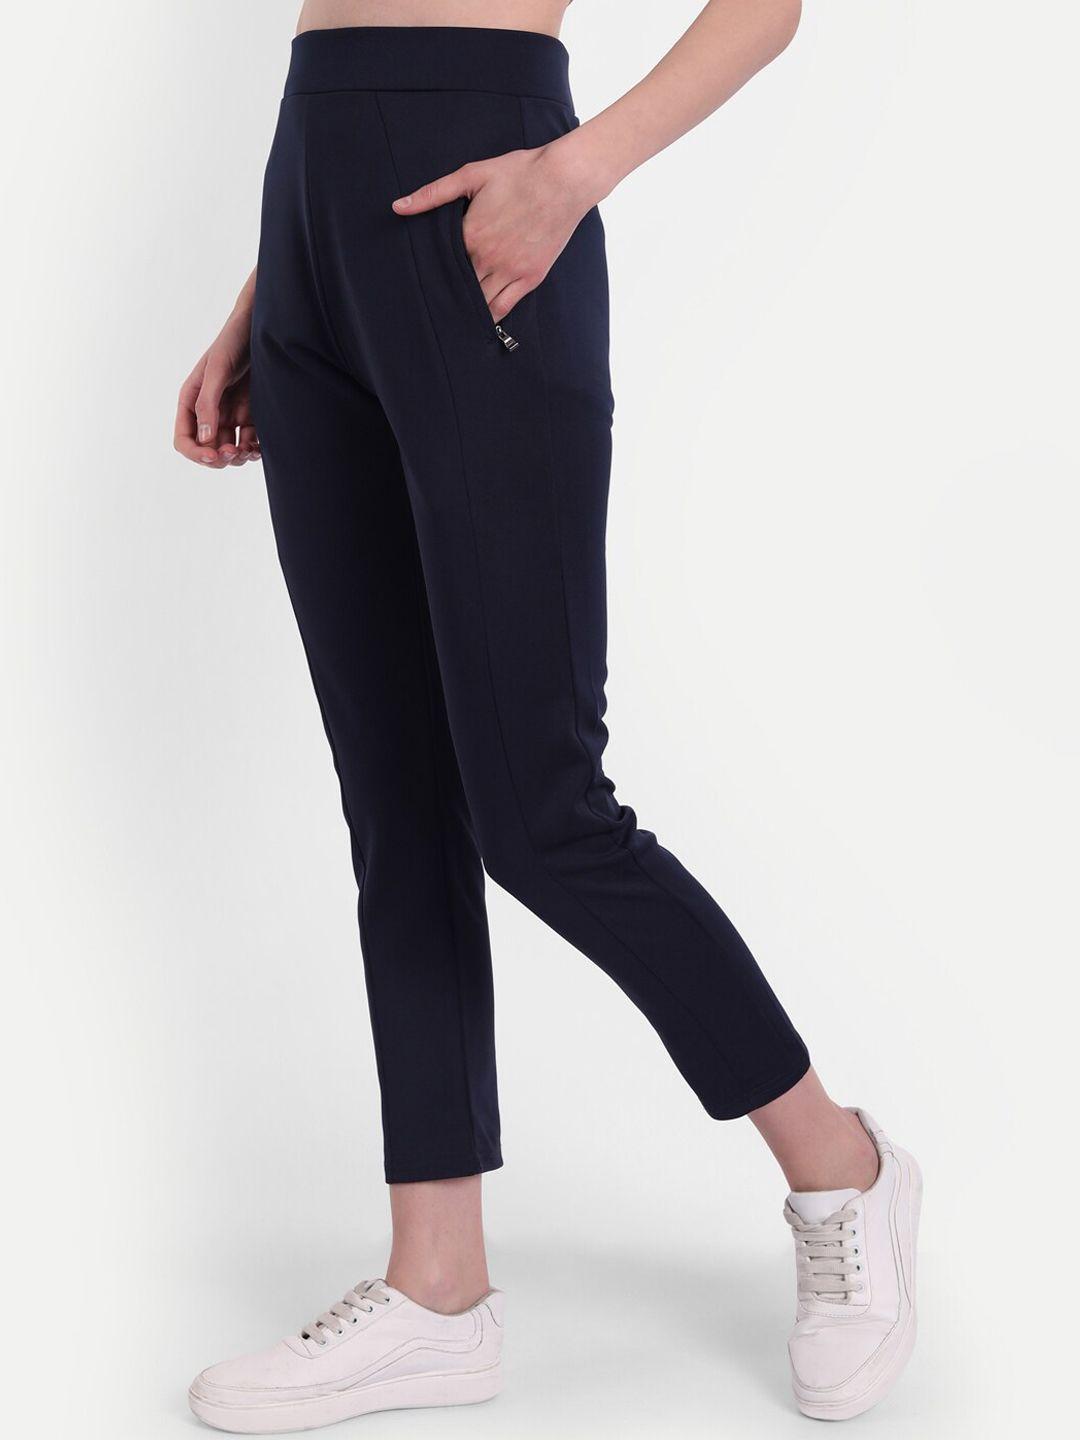 next one women slim-fit stretchable high- rise training or gym track pants